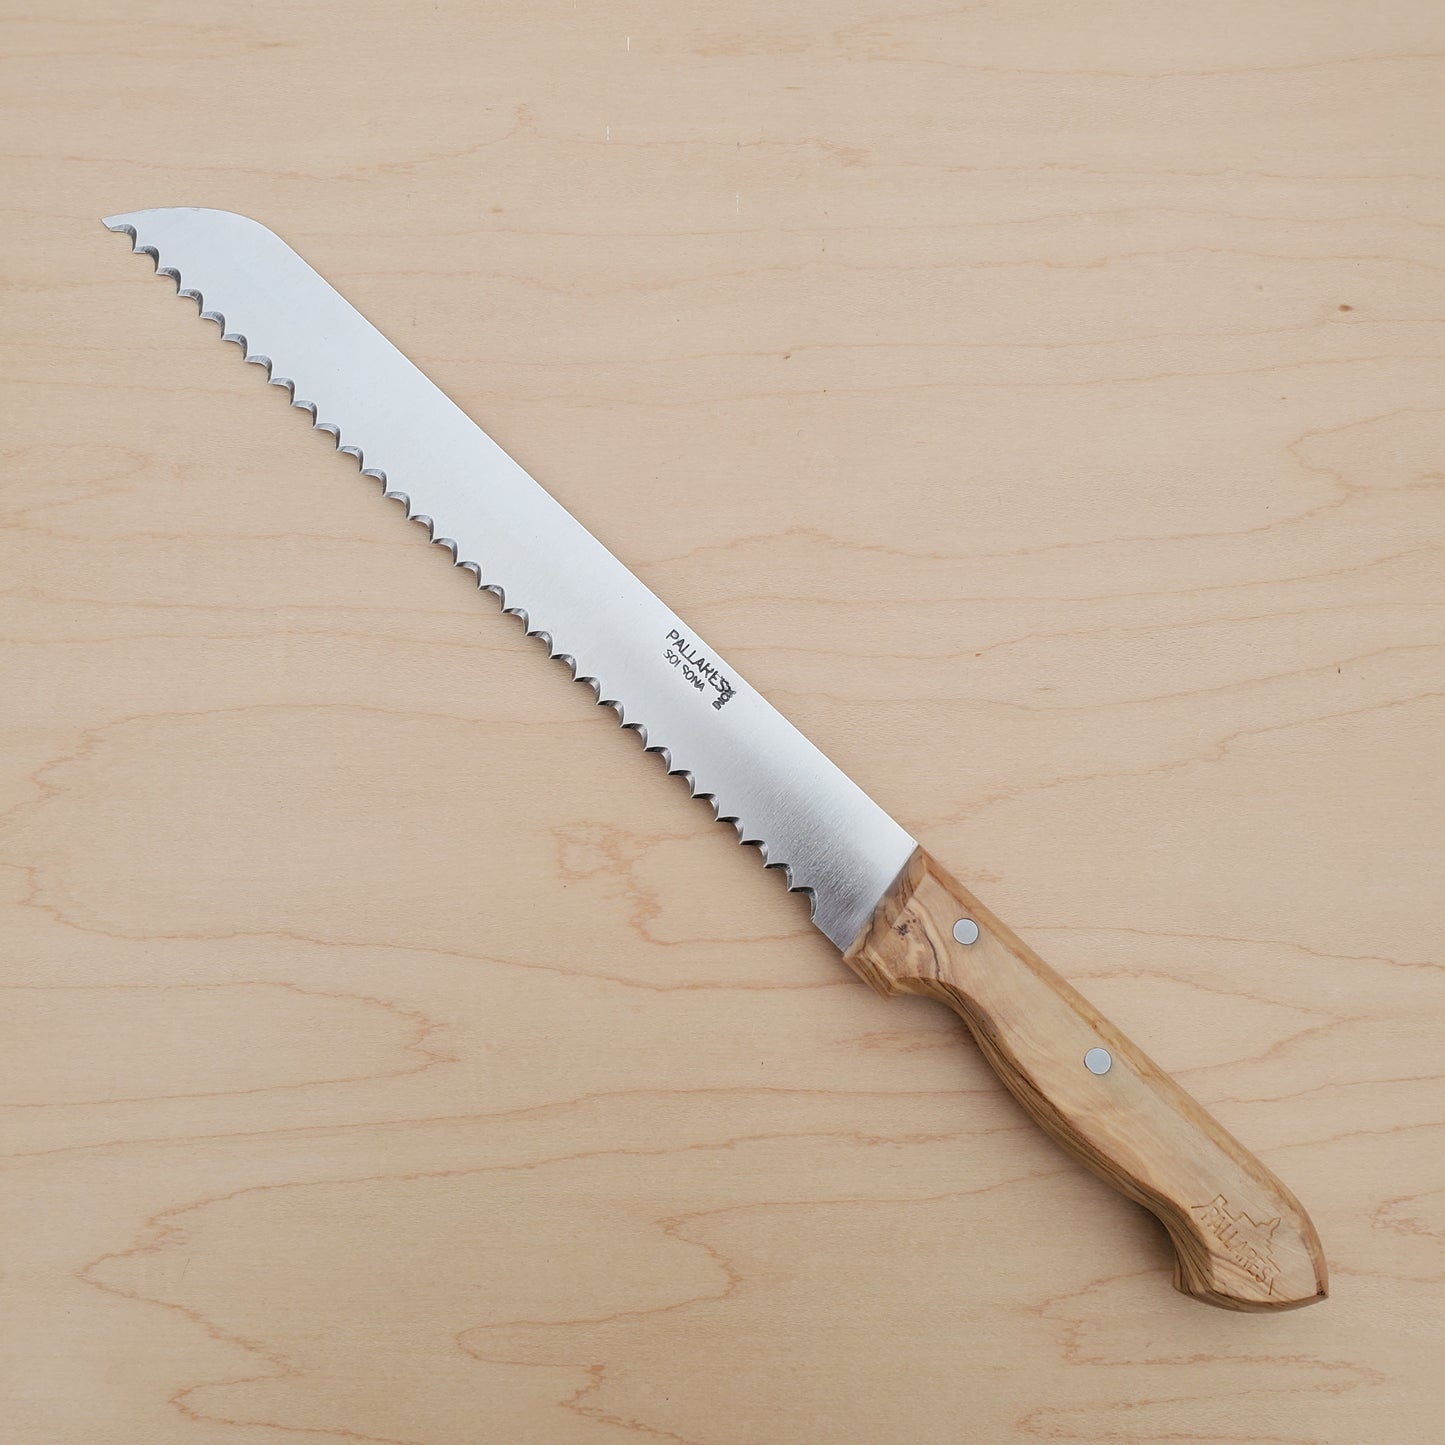 Pallares Bread Knife 10" - Olive